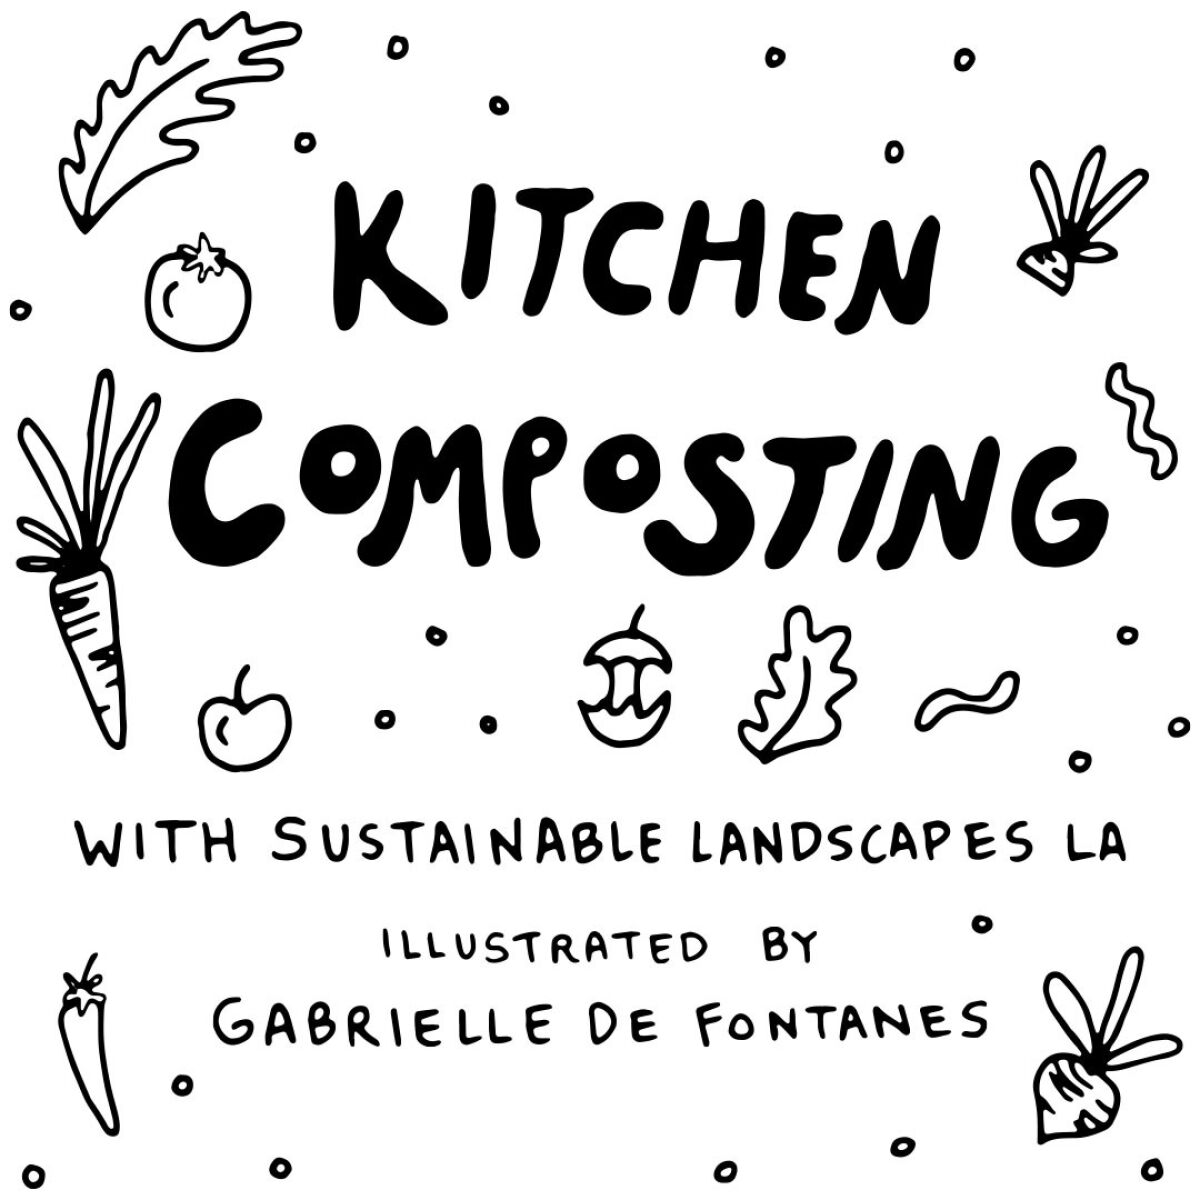 "Kitchen composting with susainable landscapes LA, illustrated by Gabrielle De Fontanes 